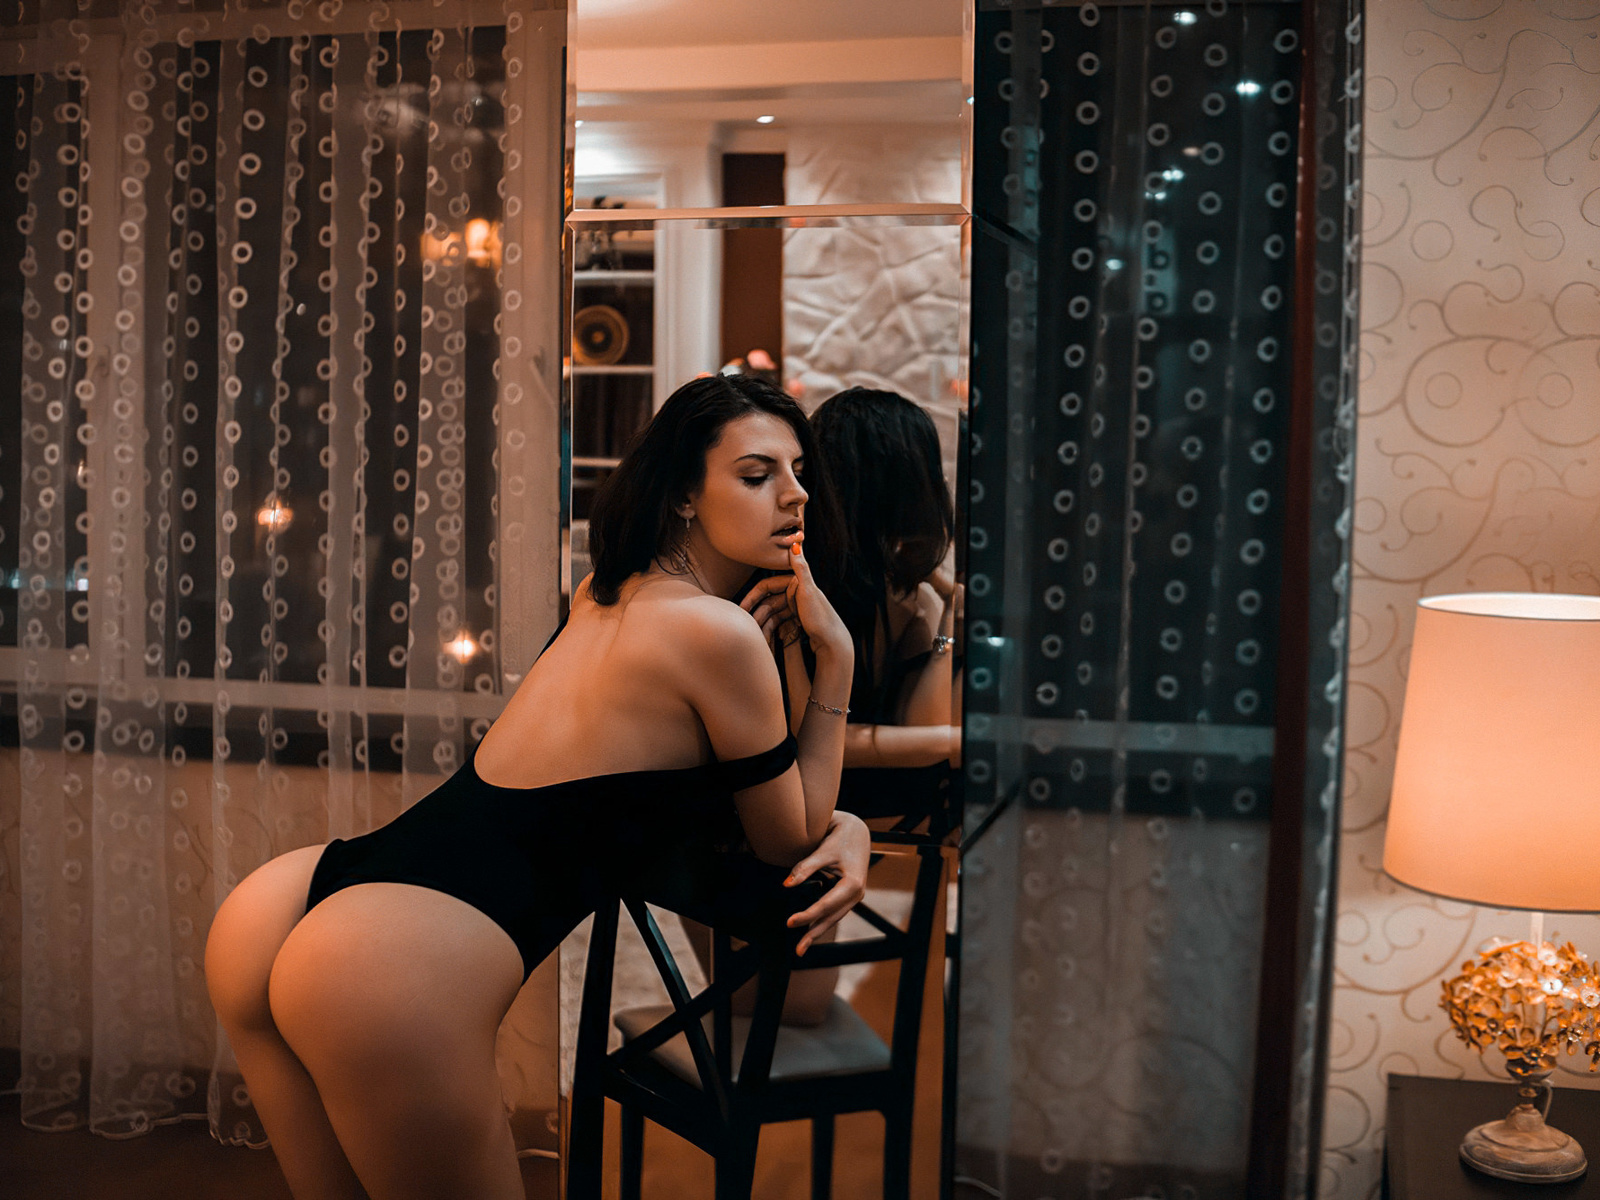 women, ass, lamp, mirror, reflection, window, bodysuit, finger on lips, women indoors, painted nails, chair